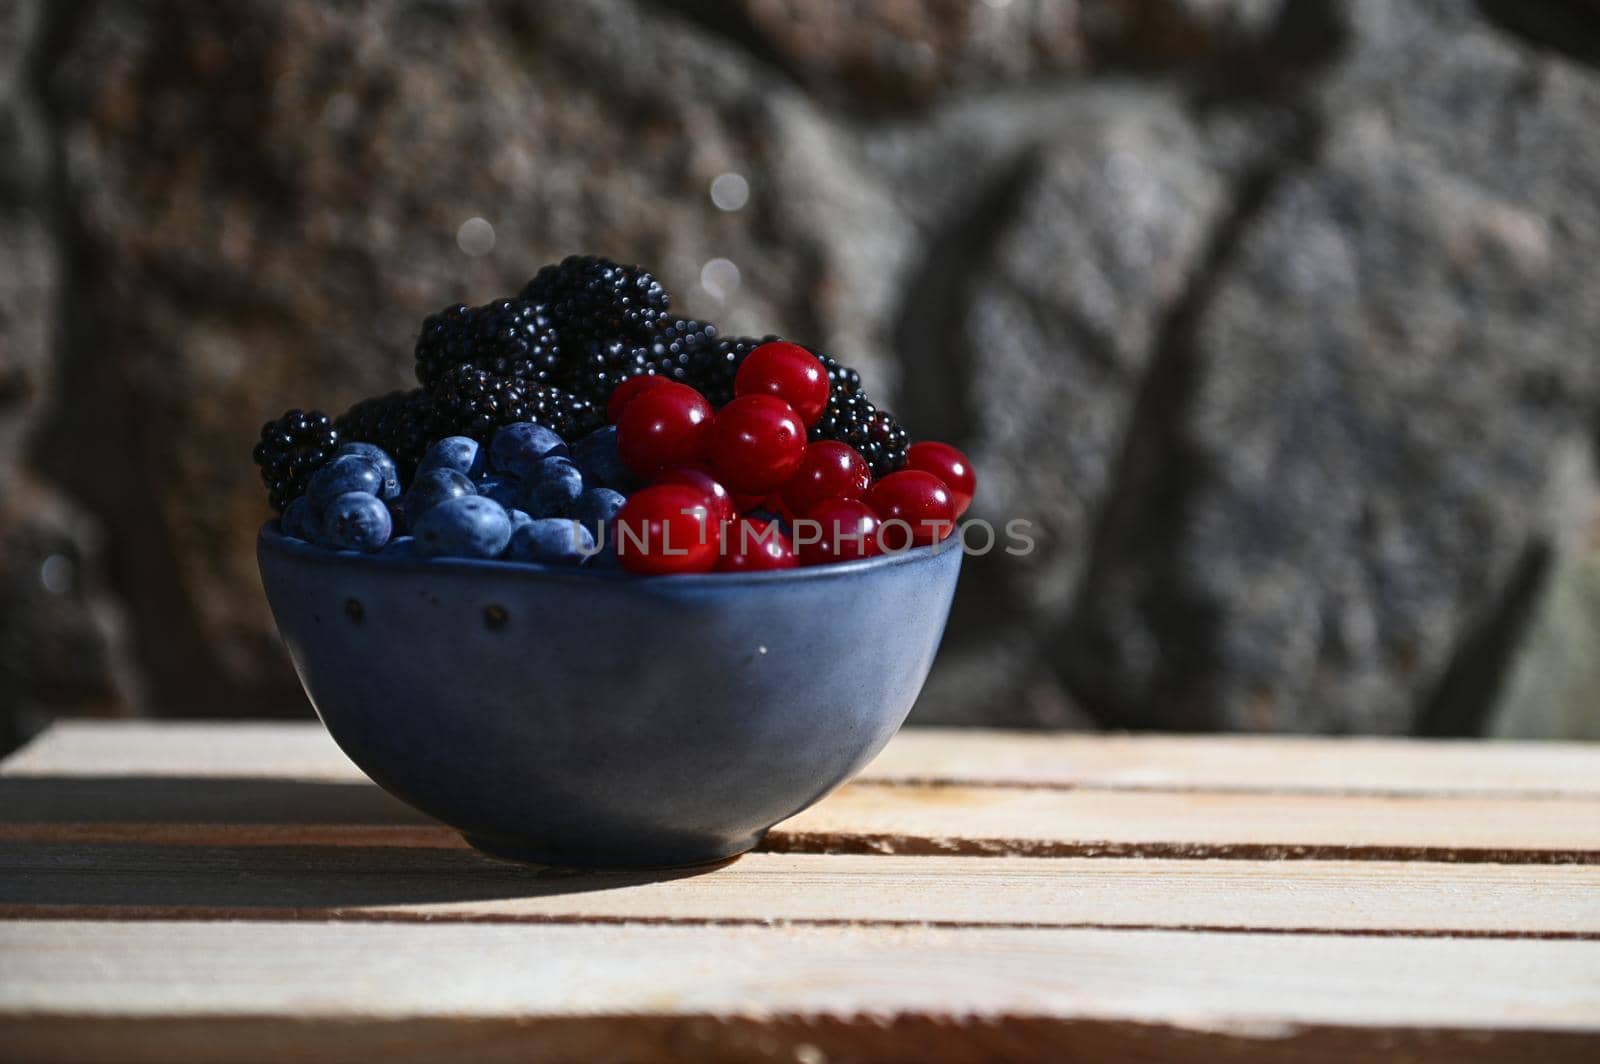 Close-up of fresh juicy and ripe seasonal wild berries from an organic farm- blueberries, blackberries and cherries in a blue ceramic bowl on a wooden crate against a gray stone backdrop. Healthy food